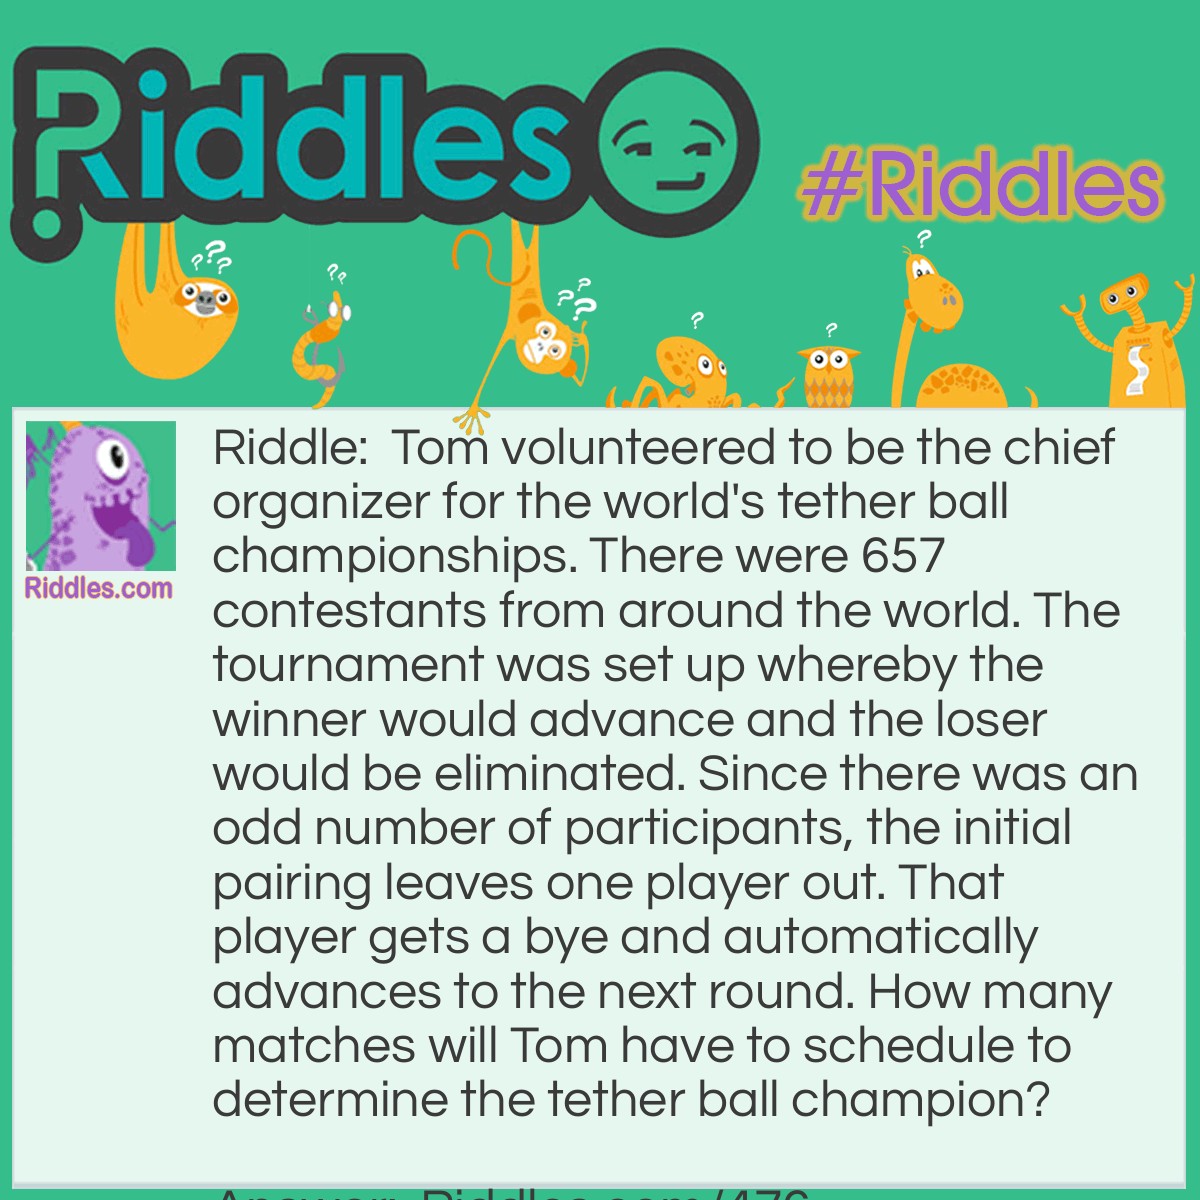 Riddle: Tom volunteered to be the chief organizer for the world's tether ball championships. There were 657 contestants from around the world. The tournament was set up whereby the winner would advance and the loser would be eliminated. Since there was an odd number of participants, the initial pairing leaves one player out. That player gets a bye and automatically advances to the next round. How many matches will Tom have to schedule to determine the tether ball champion? Answer: 656 matches will be needed.